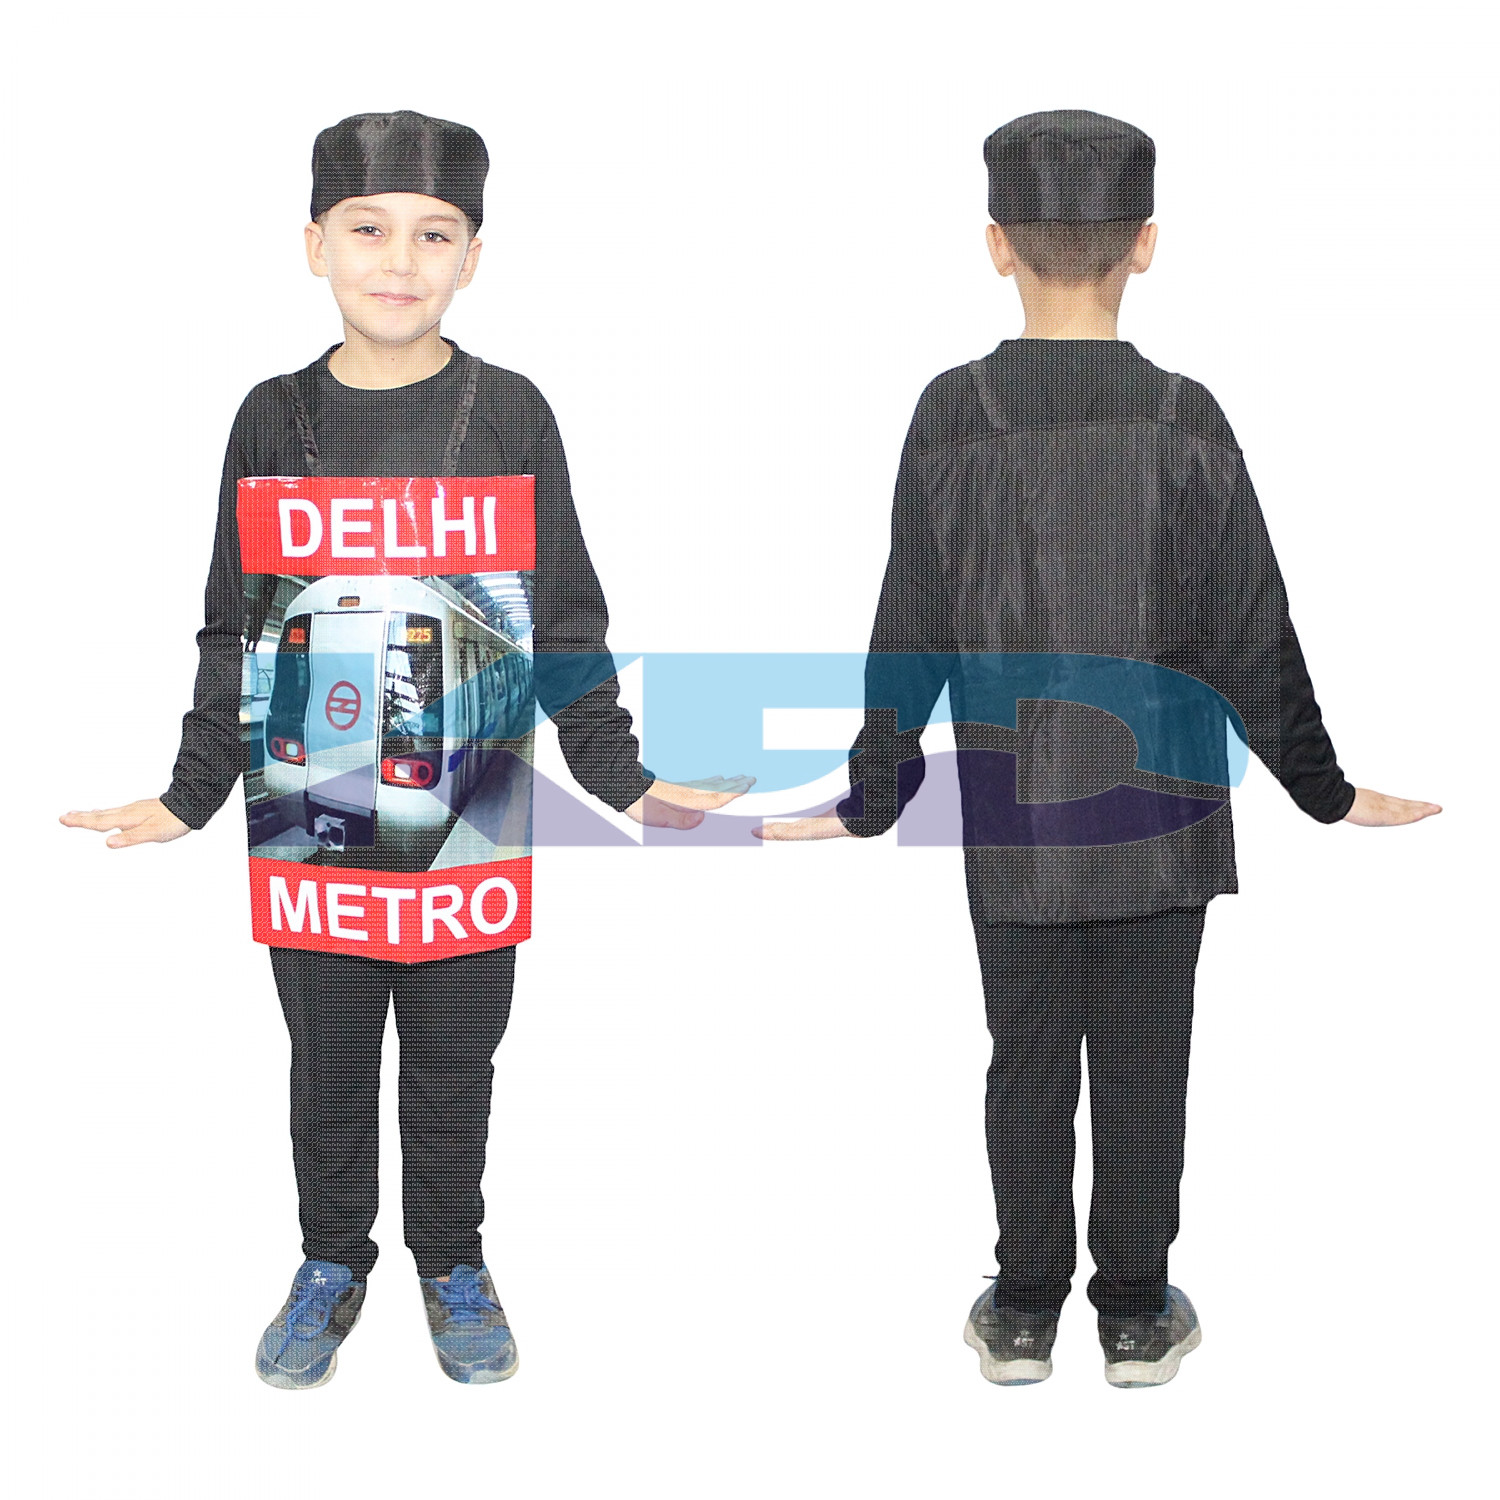 Metro Train Costume For Kids/Vehicle Fancy Dress For Kids/Delhi Metro Costume/For Kids Annual function/Theme Party/Competition/Stage Shows/Birthday Party Dress